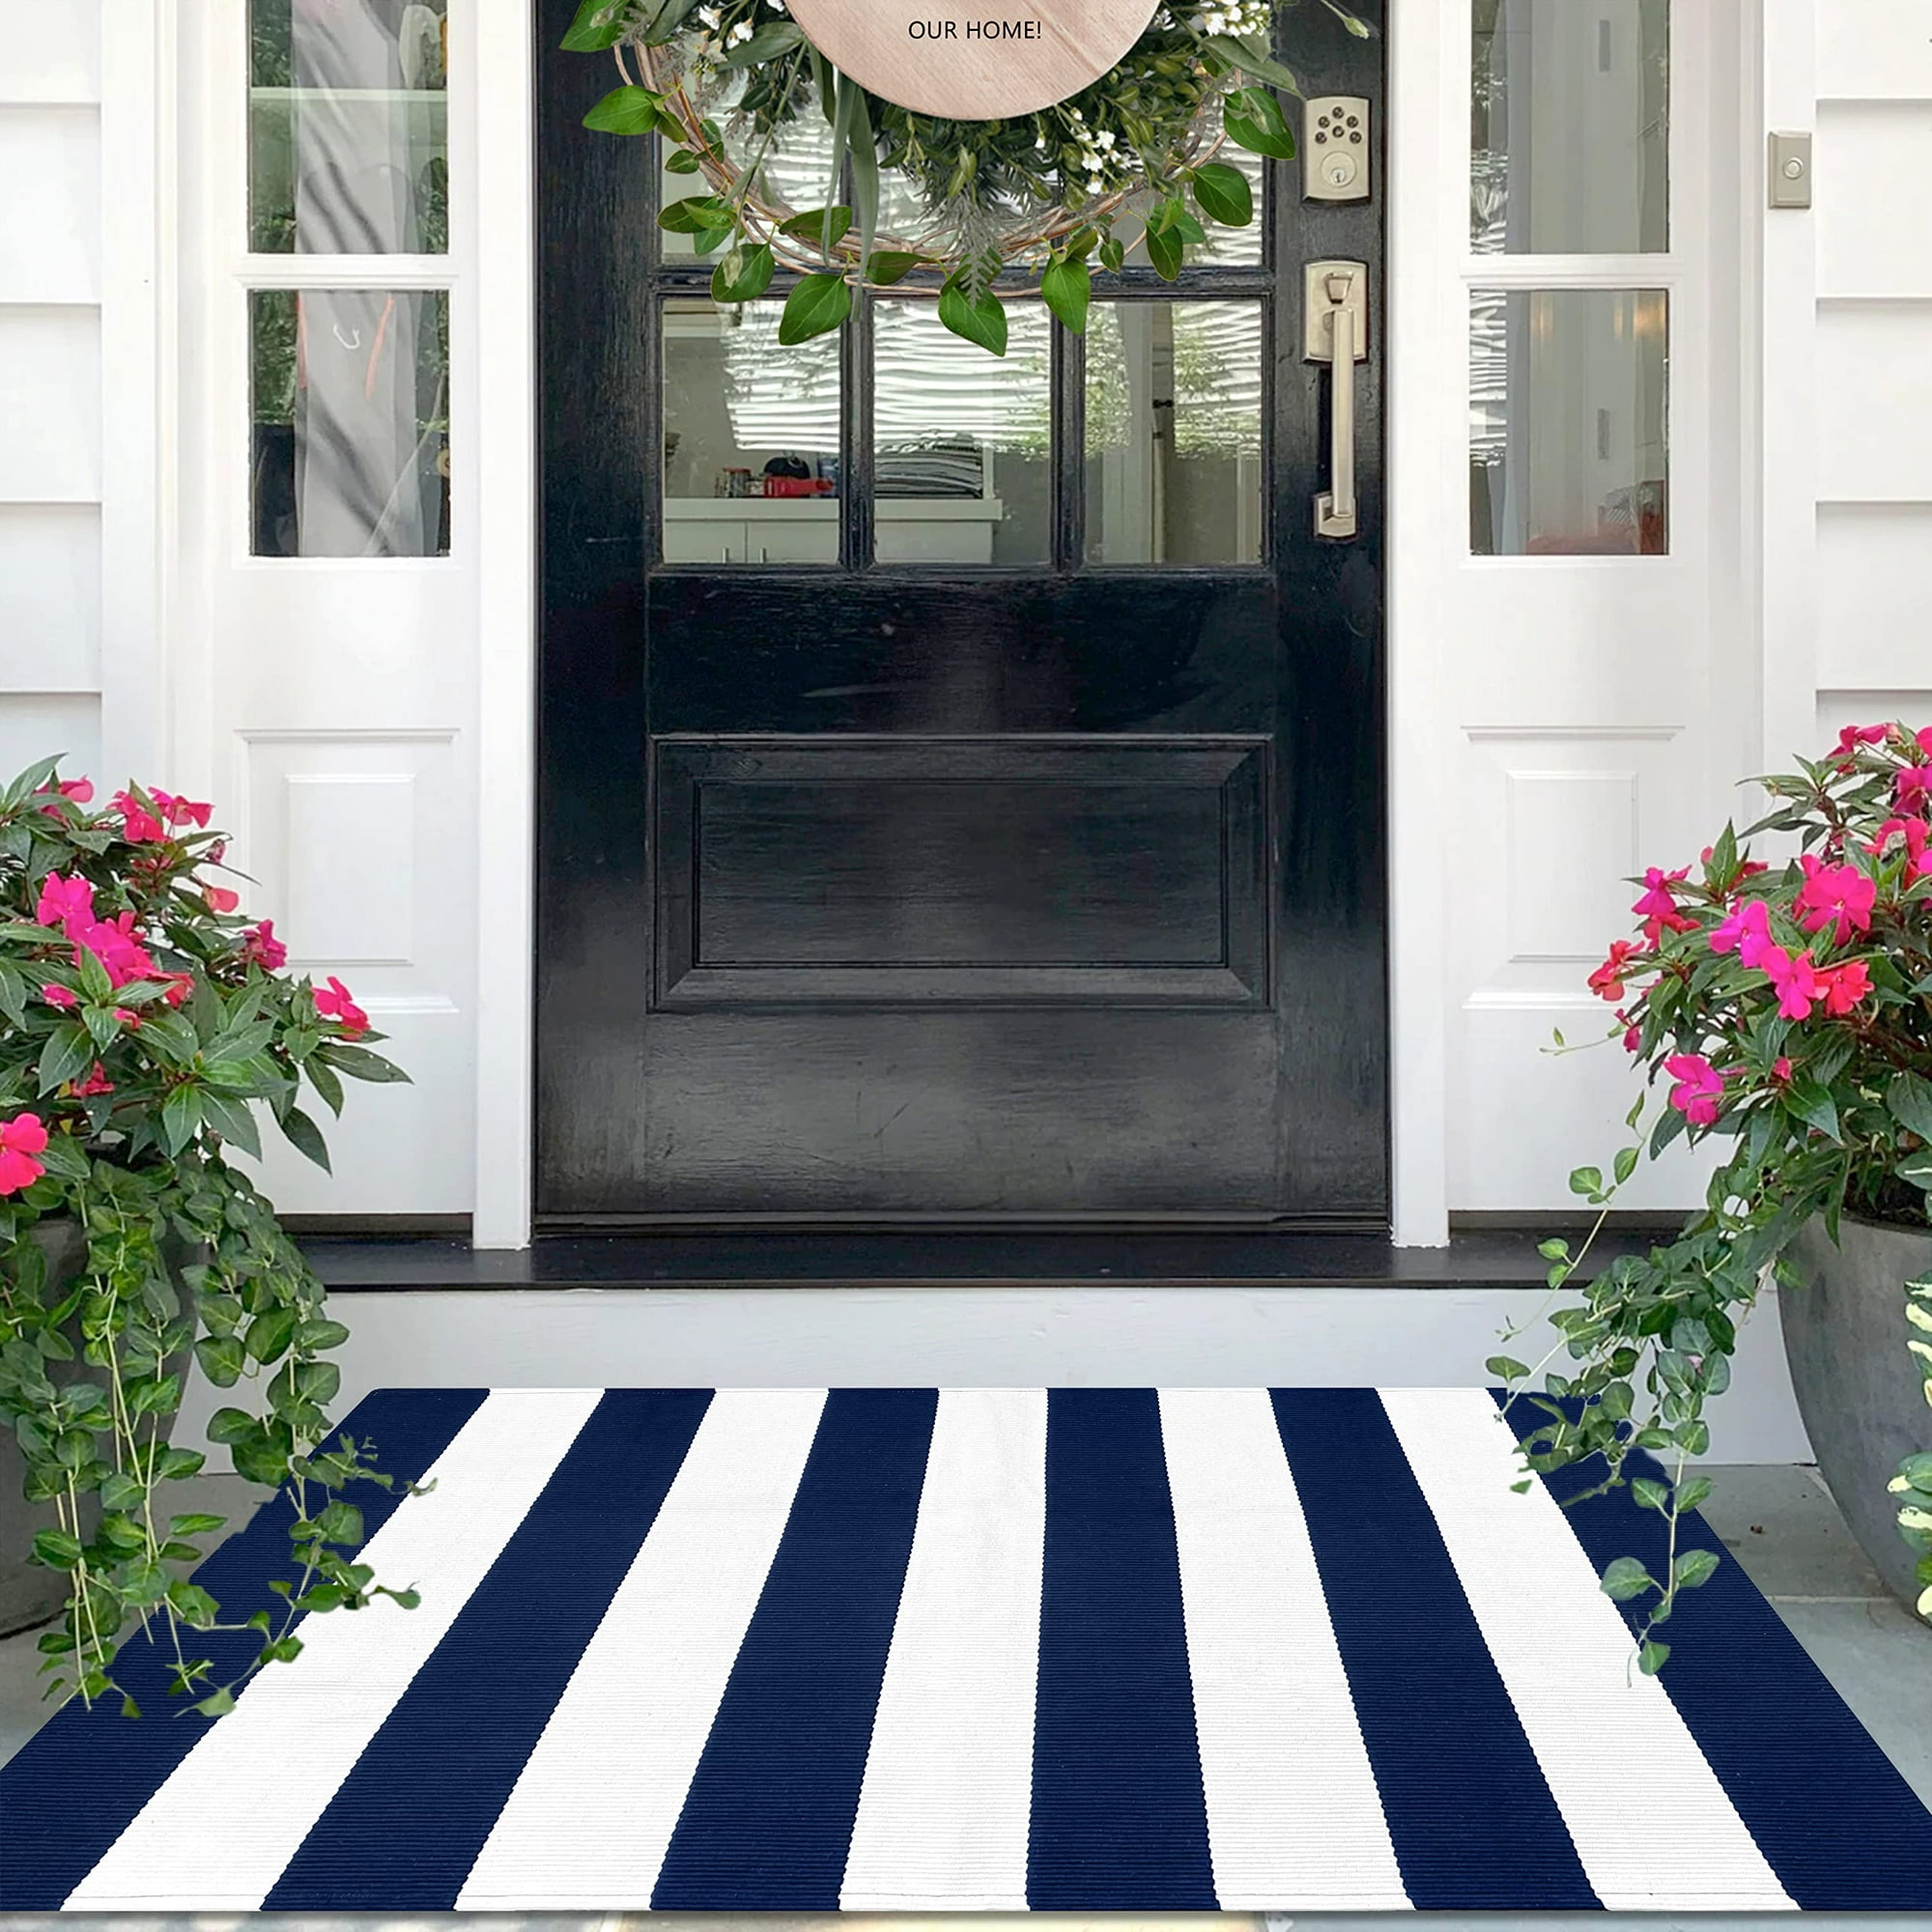 Cotton Navy and White Striped Rug Outdoor Doormat 27.5 x 43 Inches ...